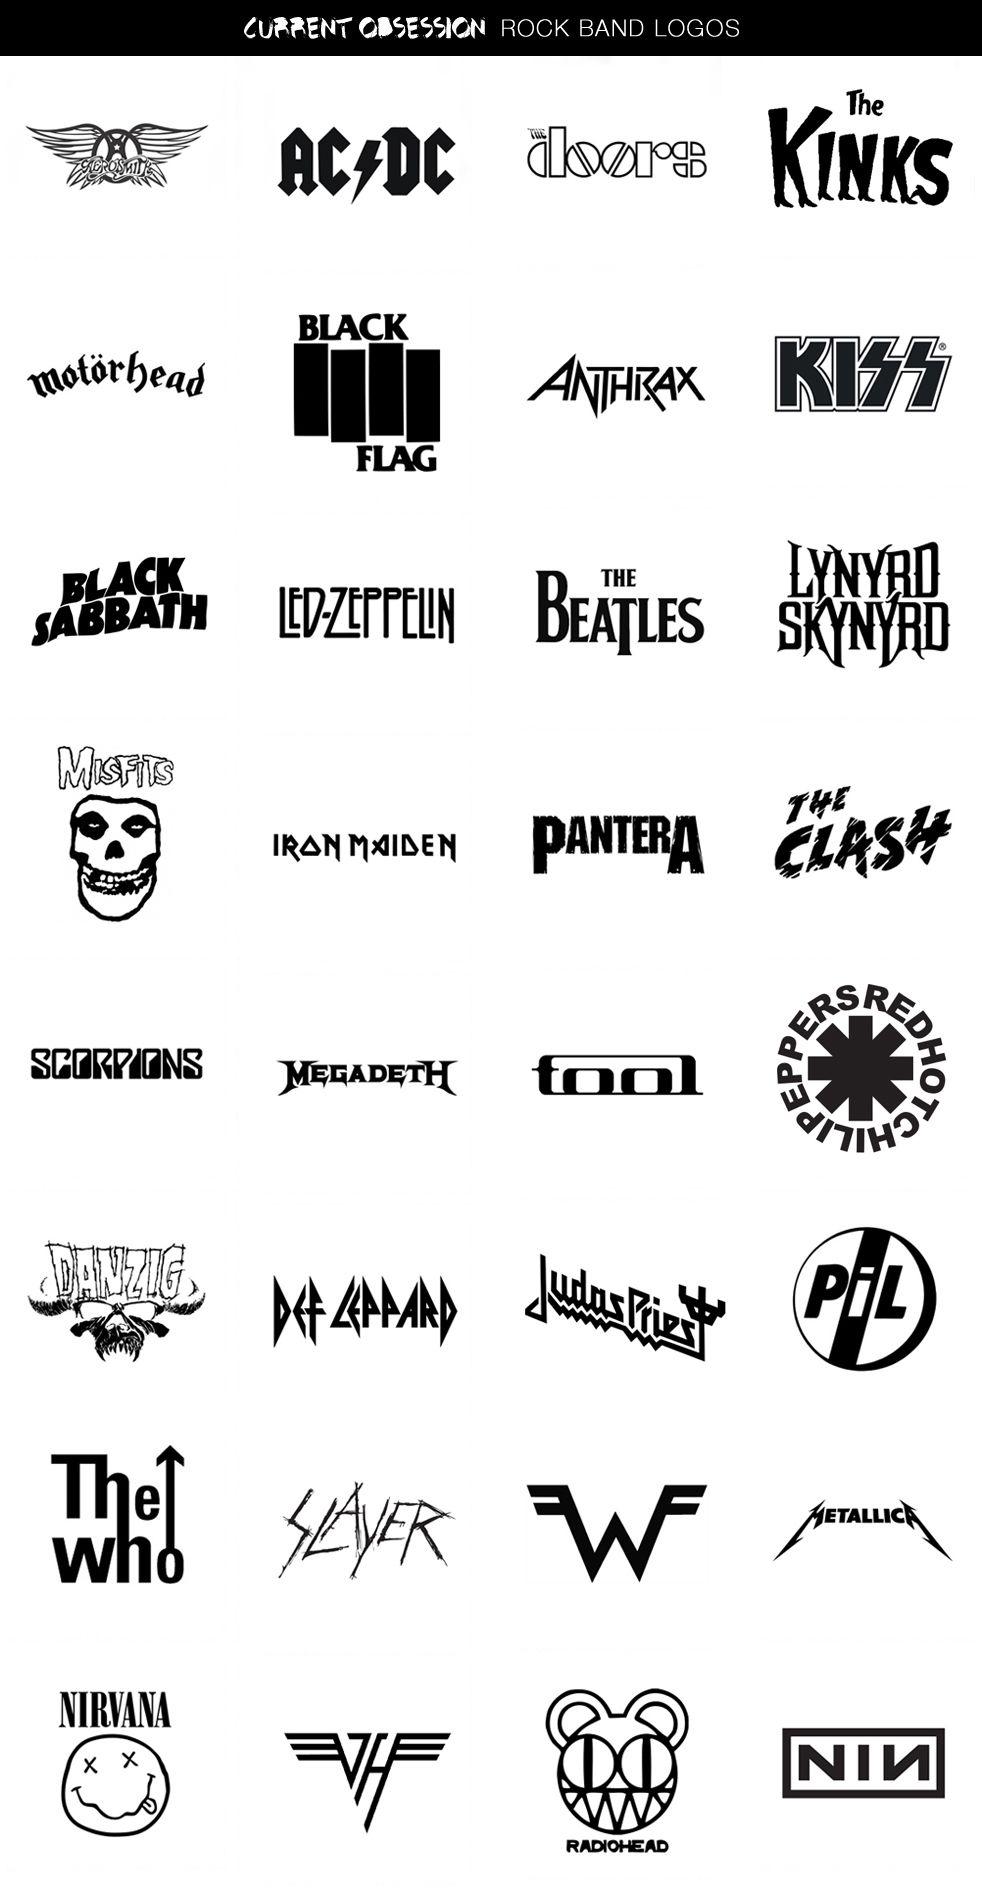 Cool Band Logo - Current Obsession: Rock Band Logos | Cool Material